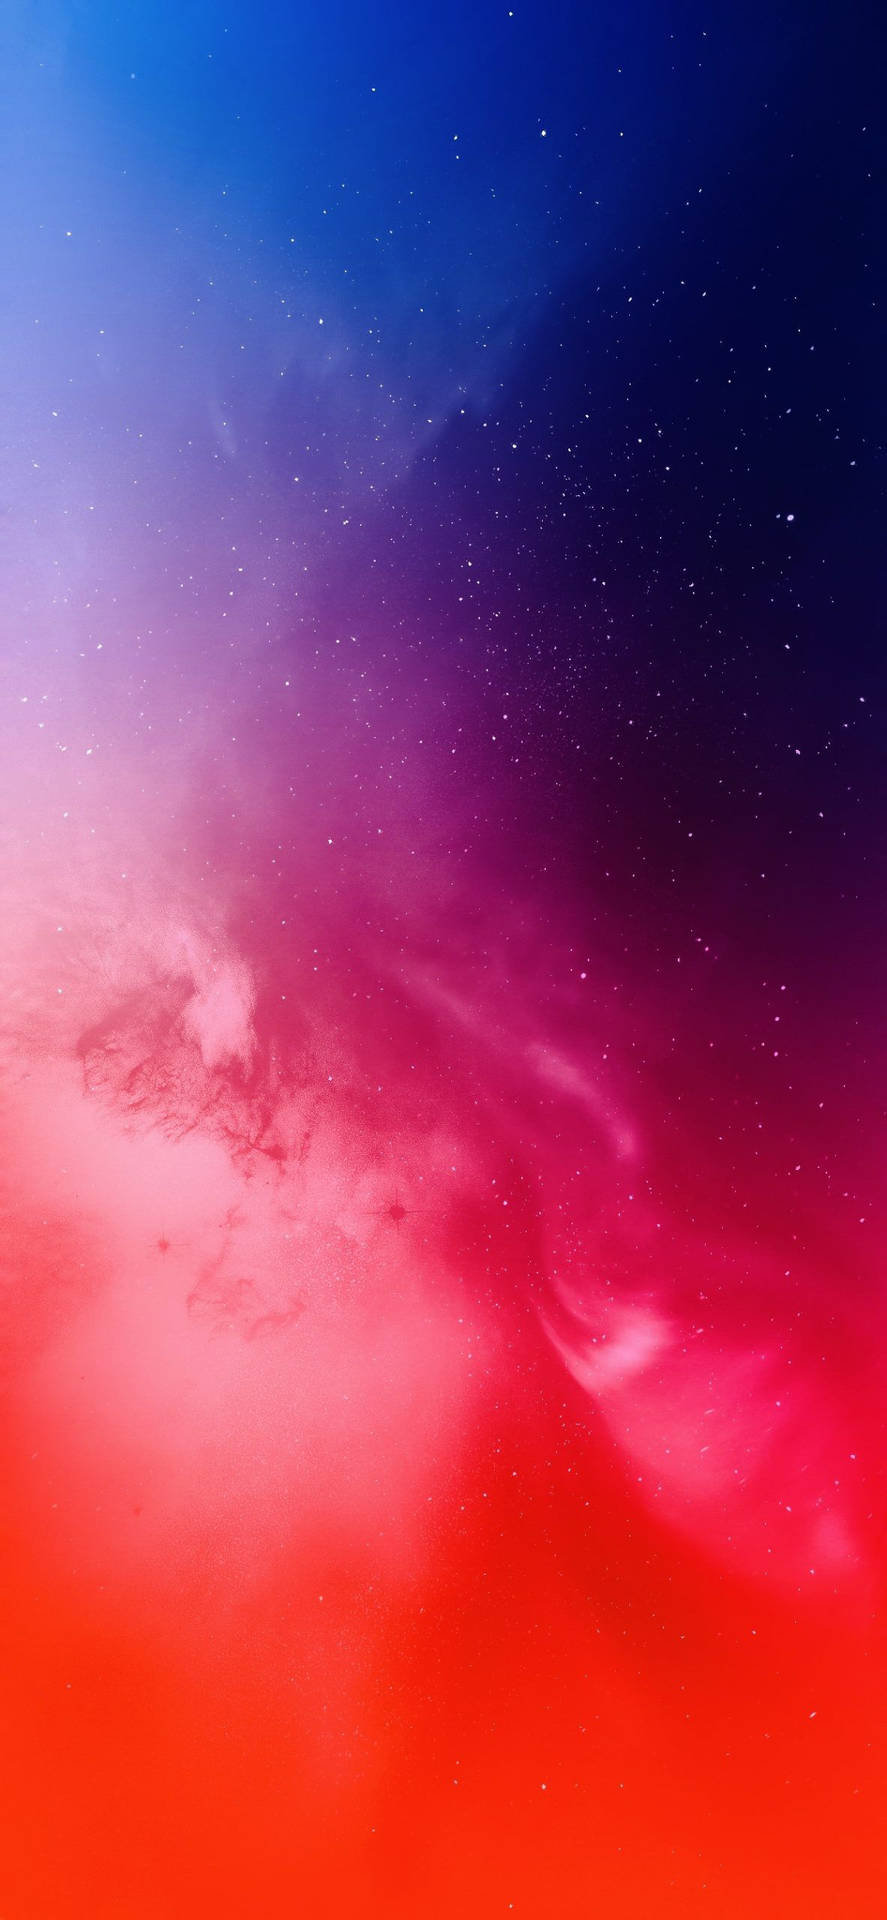 Galaxy Sky In Gradient Red Iphone Background